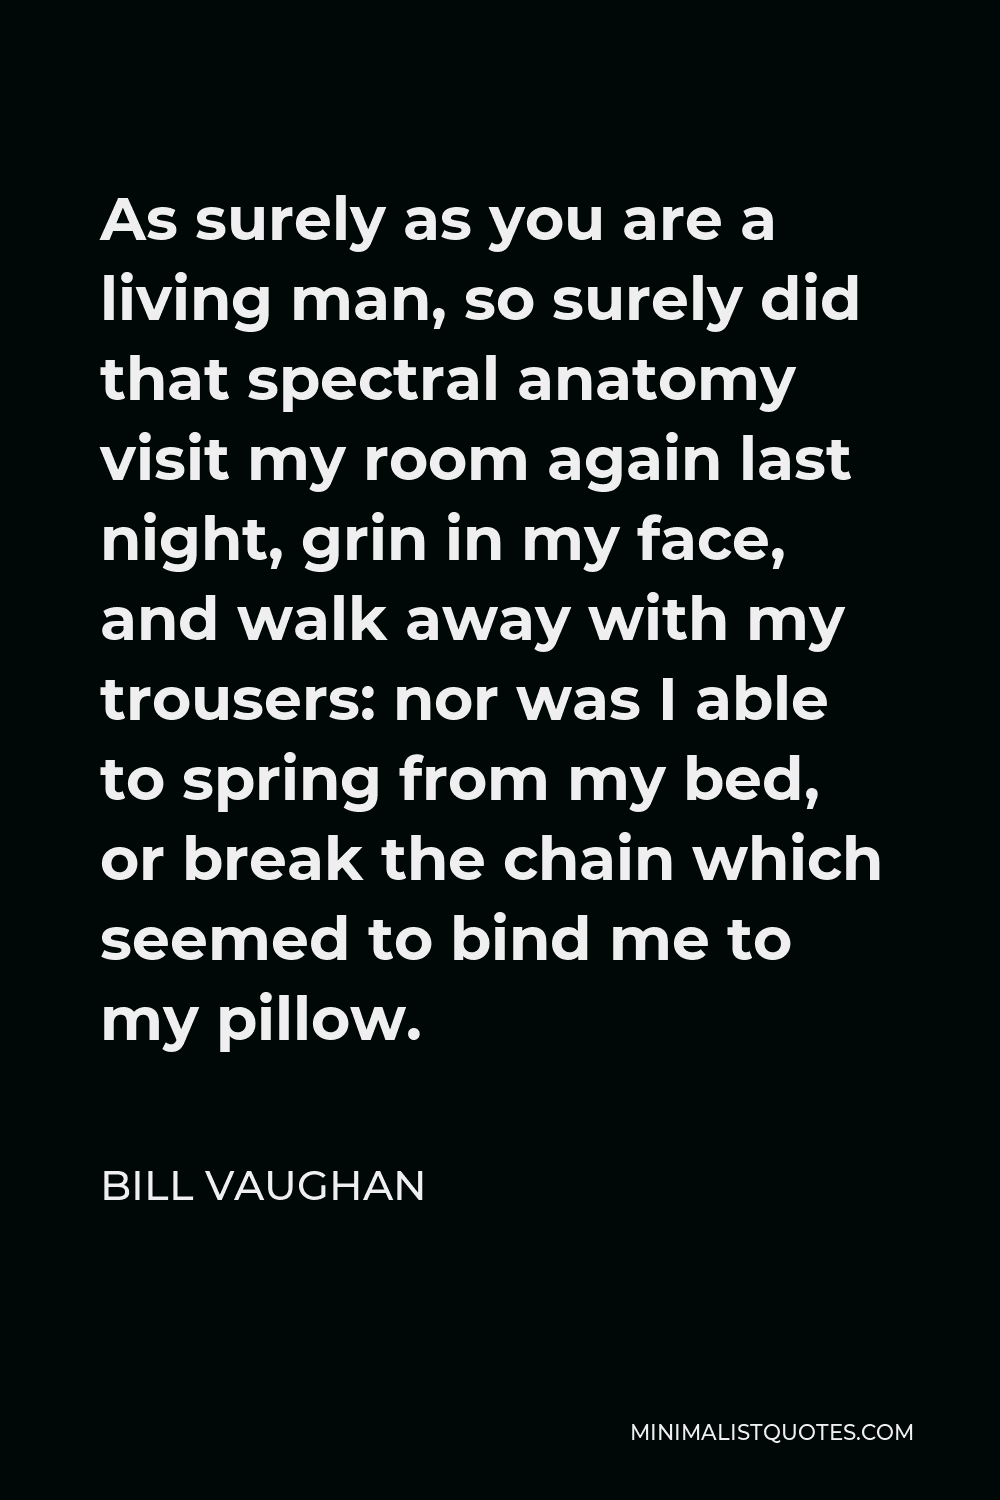 Bill Vaughan Quote - As surely as you are a living man, so surely did that spectral anatomy visit my room again last night, grin in my face, and walk away with my trousers: nor was I able to spring from my bed, or break the chain which seemed to bind me to my pillow.